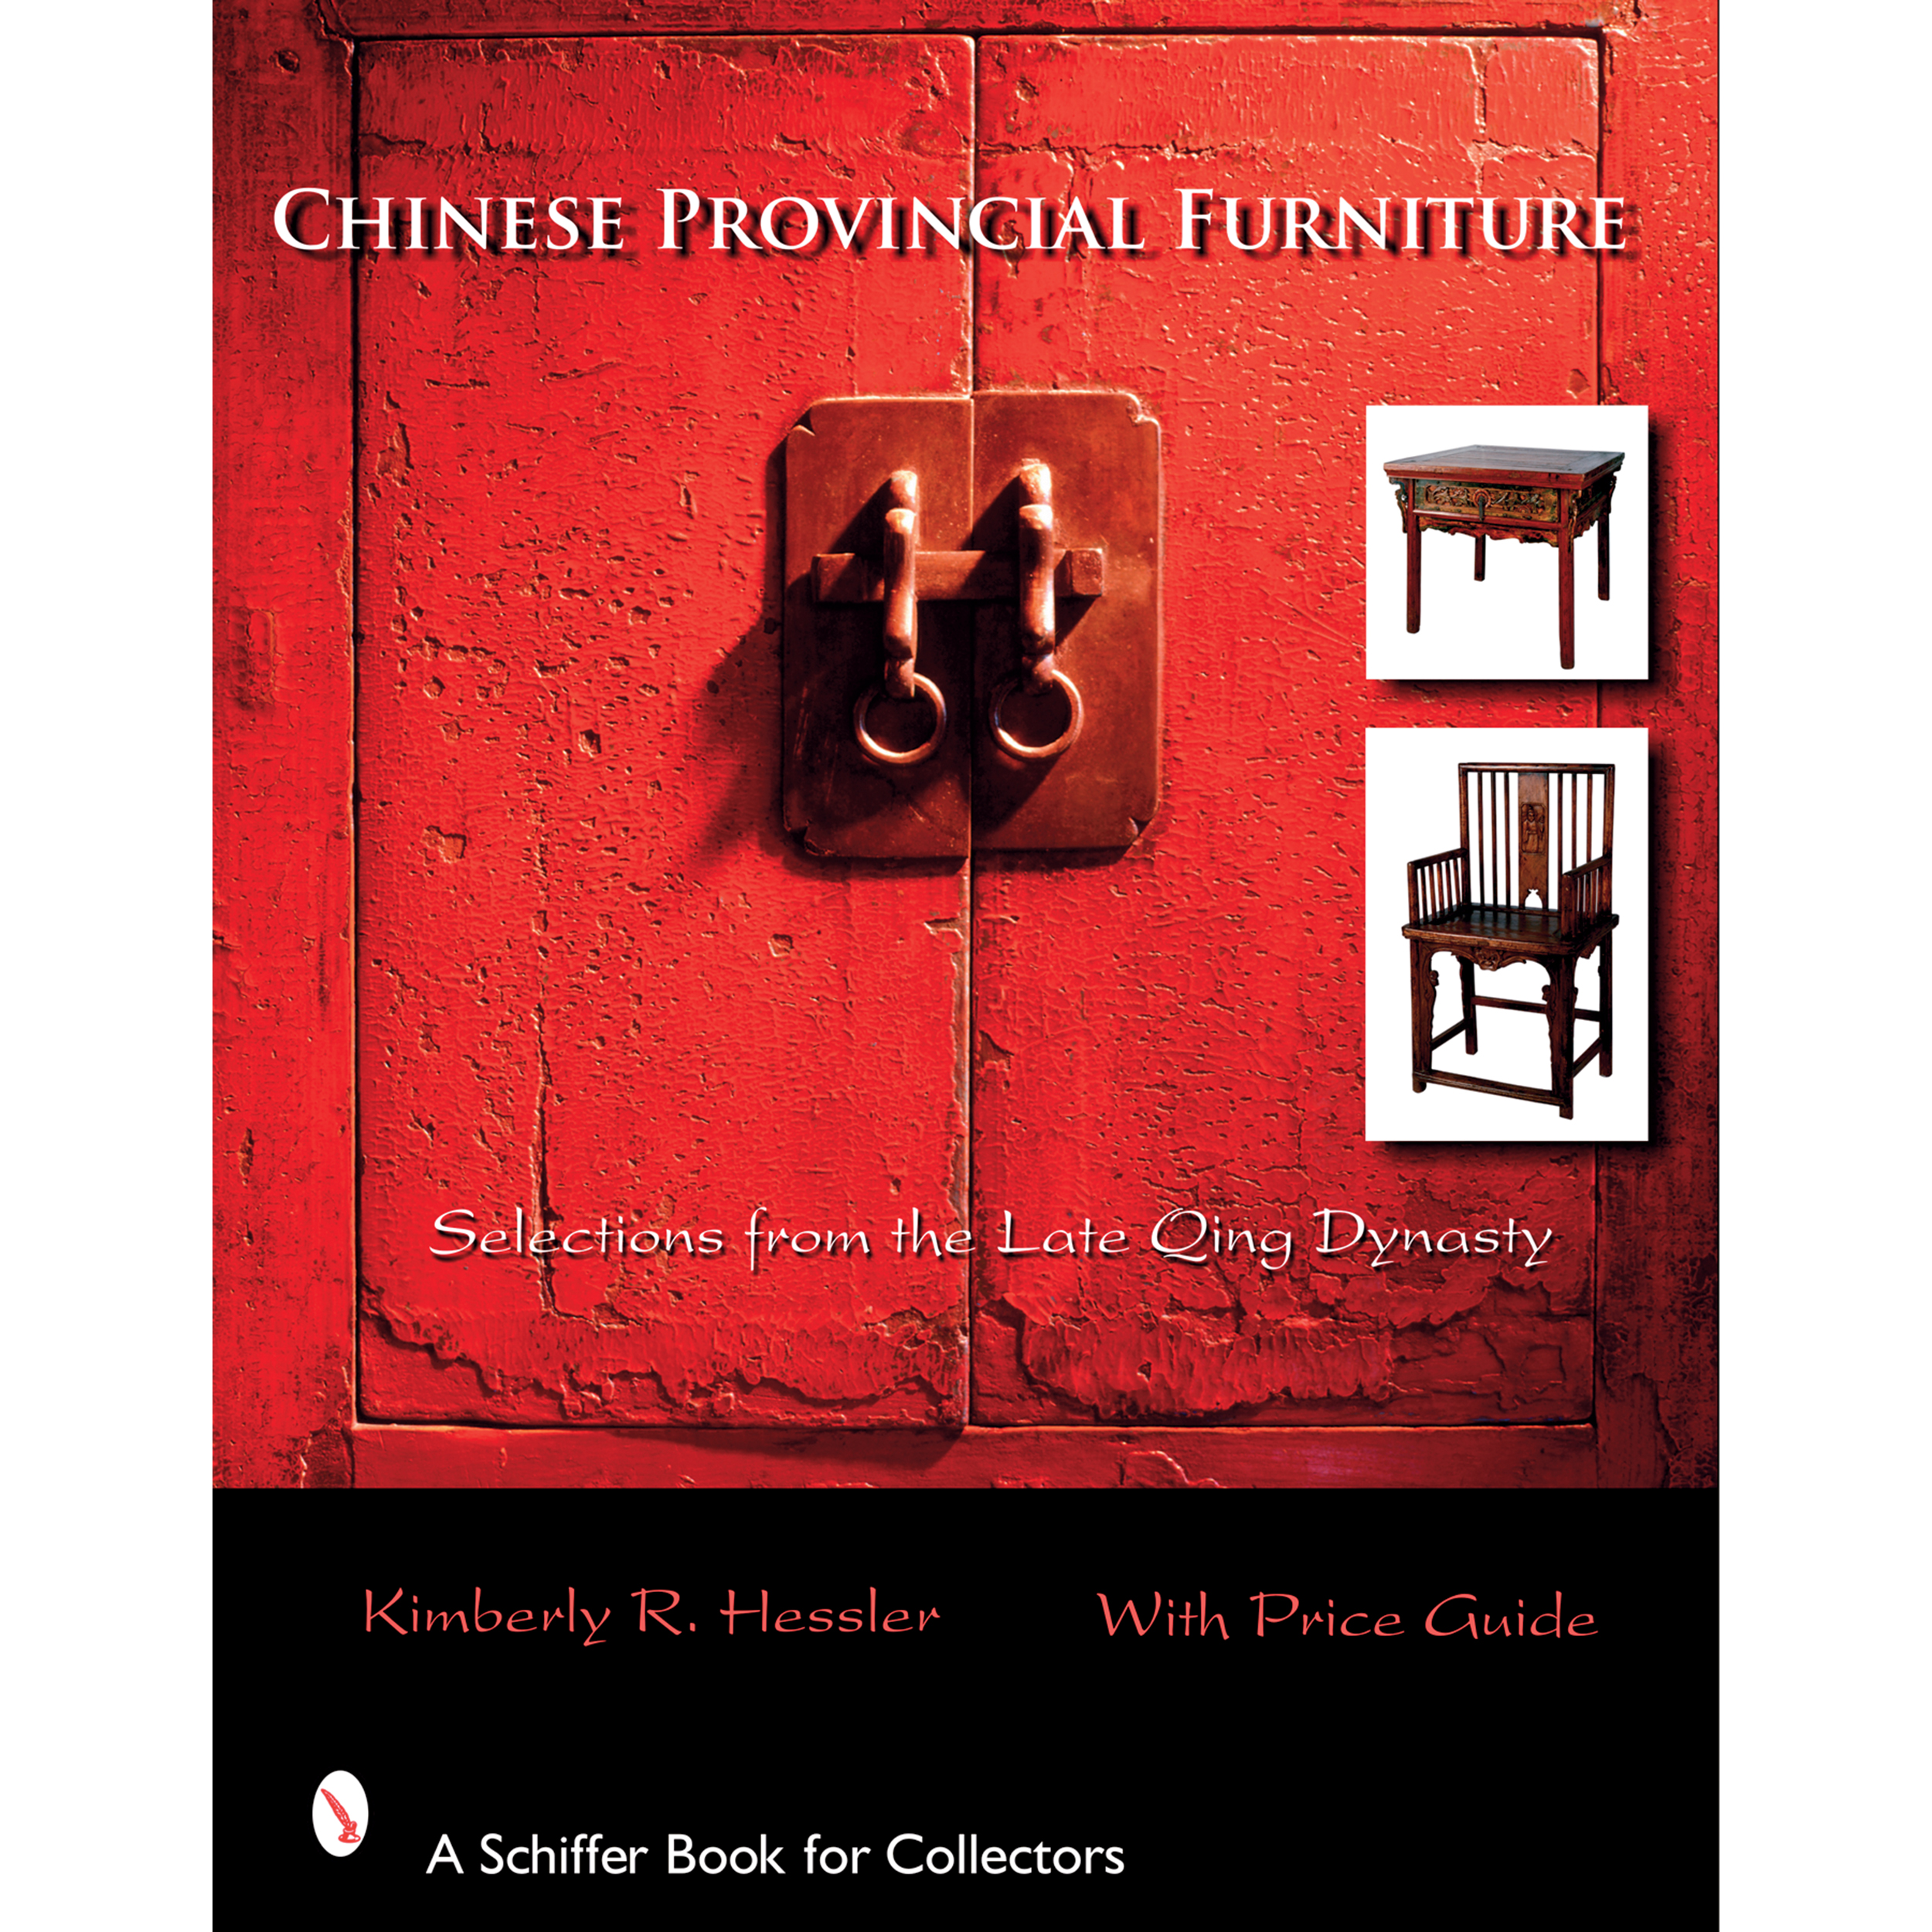 Chinese Provincial Furniture: Selections From The Late Qing Dynasty